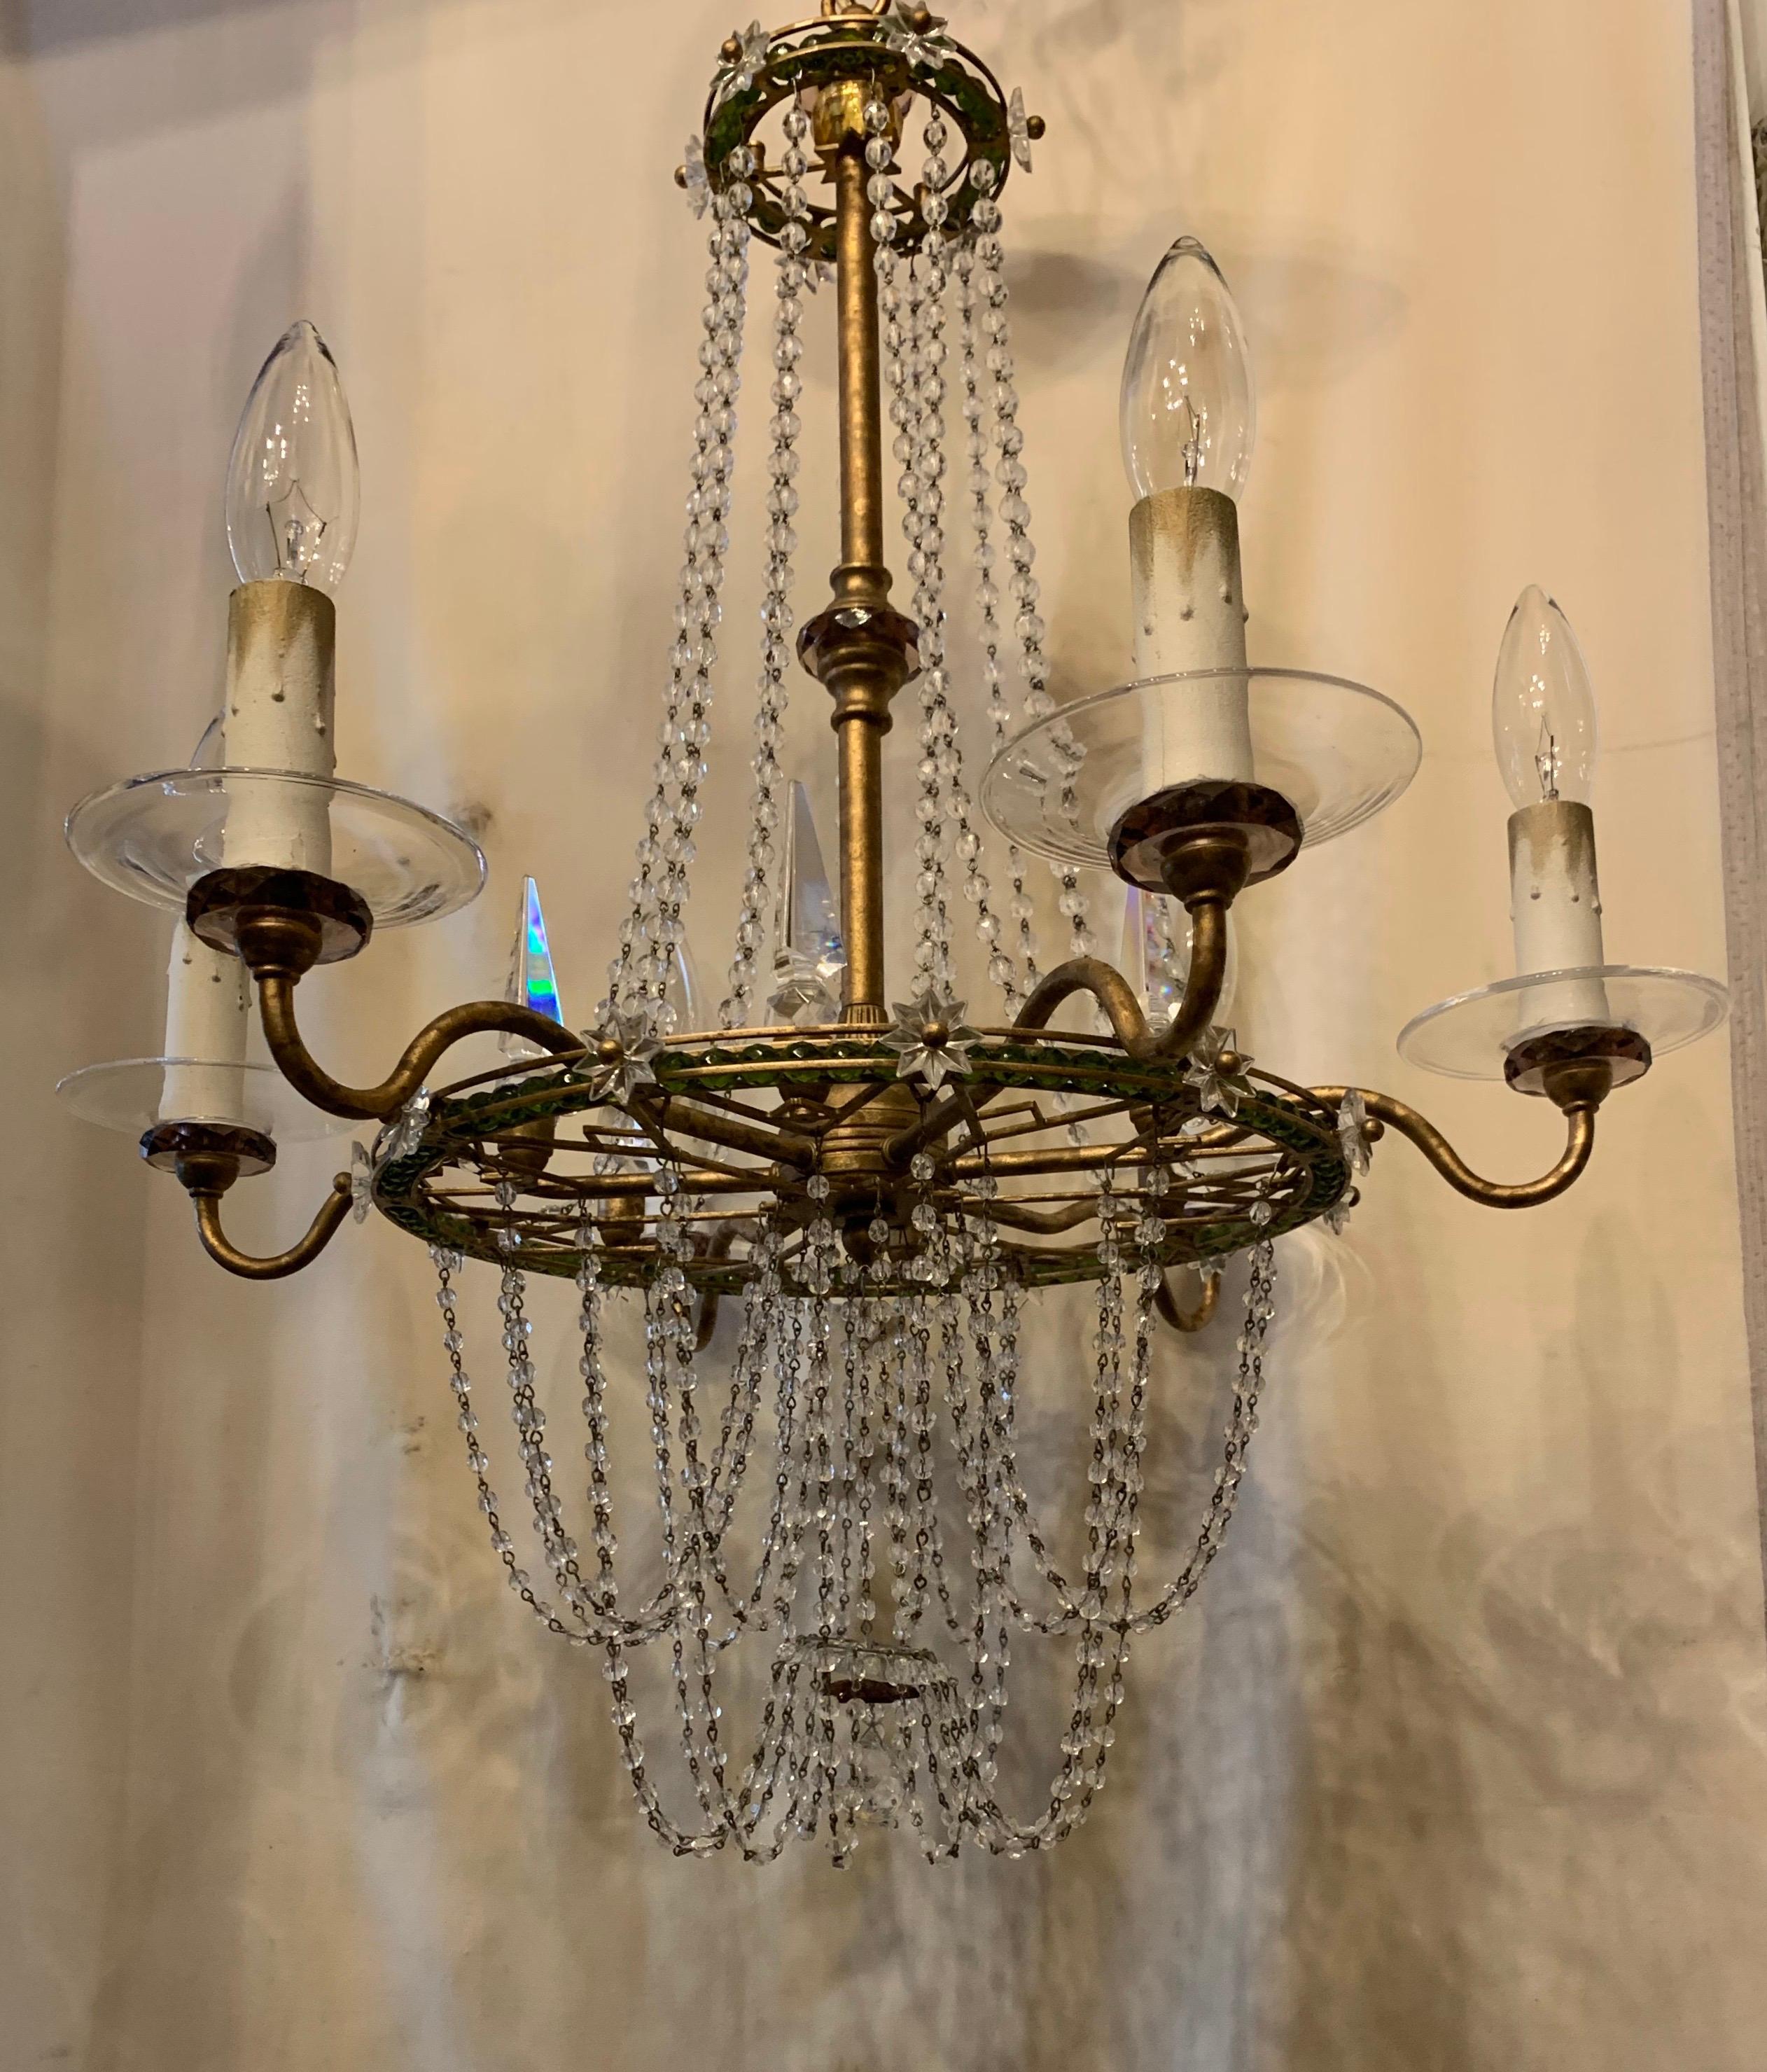 A wonderful beaded basket form crystal draping swag amethyst and green crystal inset star chandelier 6 lite fixture
Measurements: 19 1/2